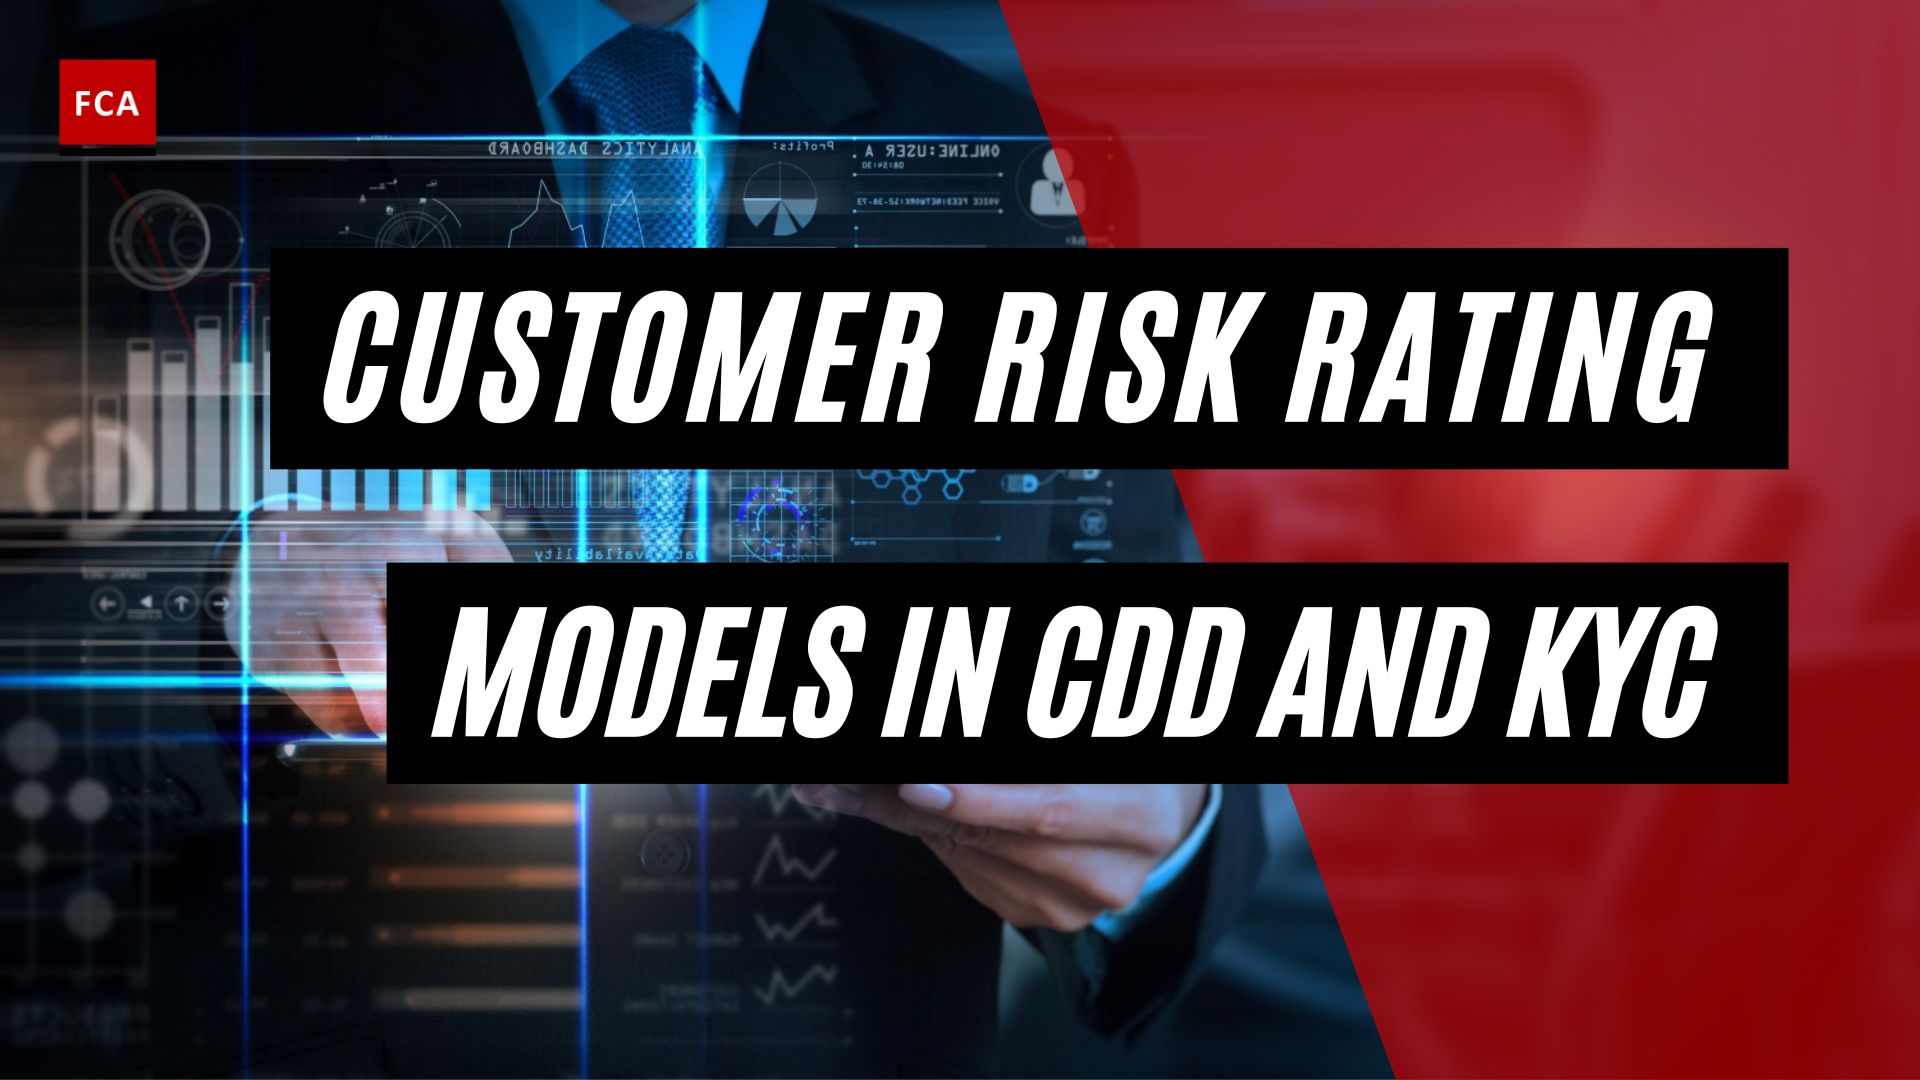 Customer Risk Rating Models In Cdd And Kyc: Discover Risky Customers